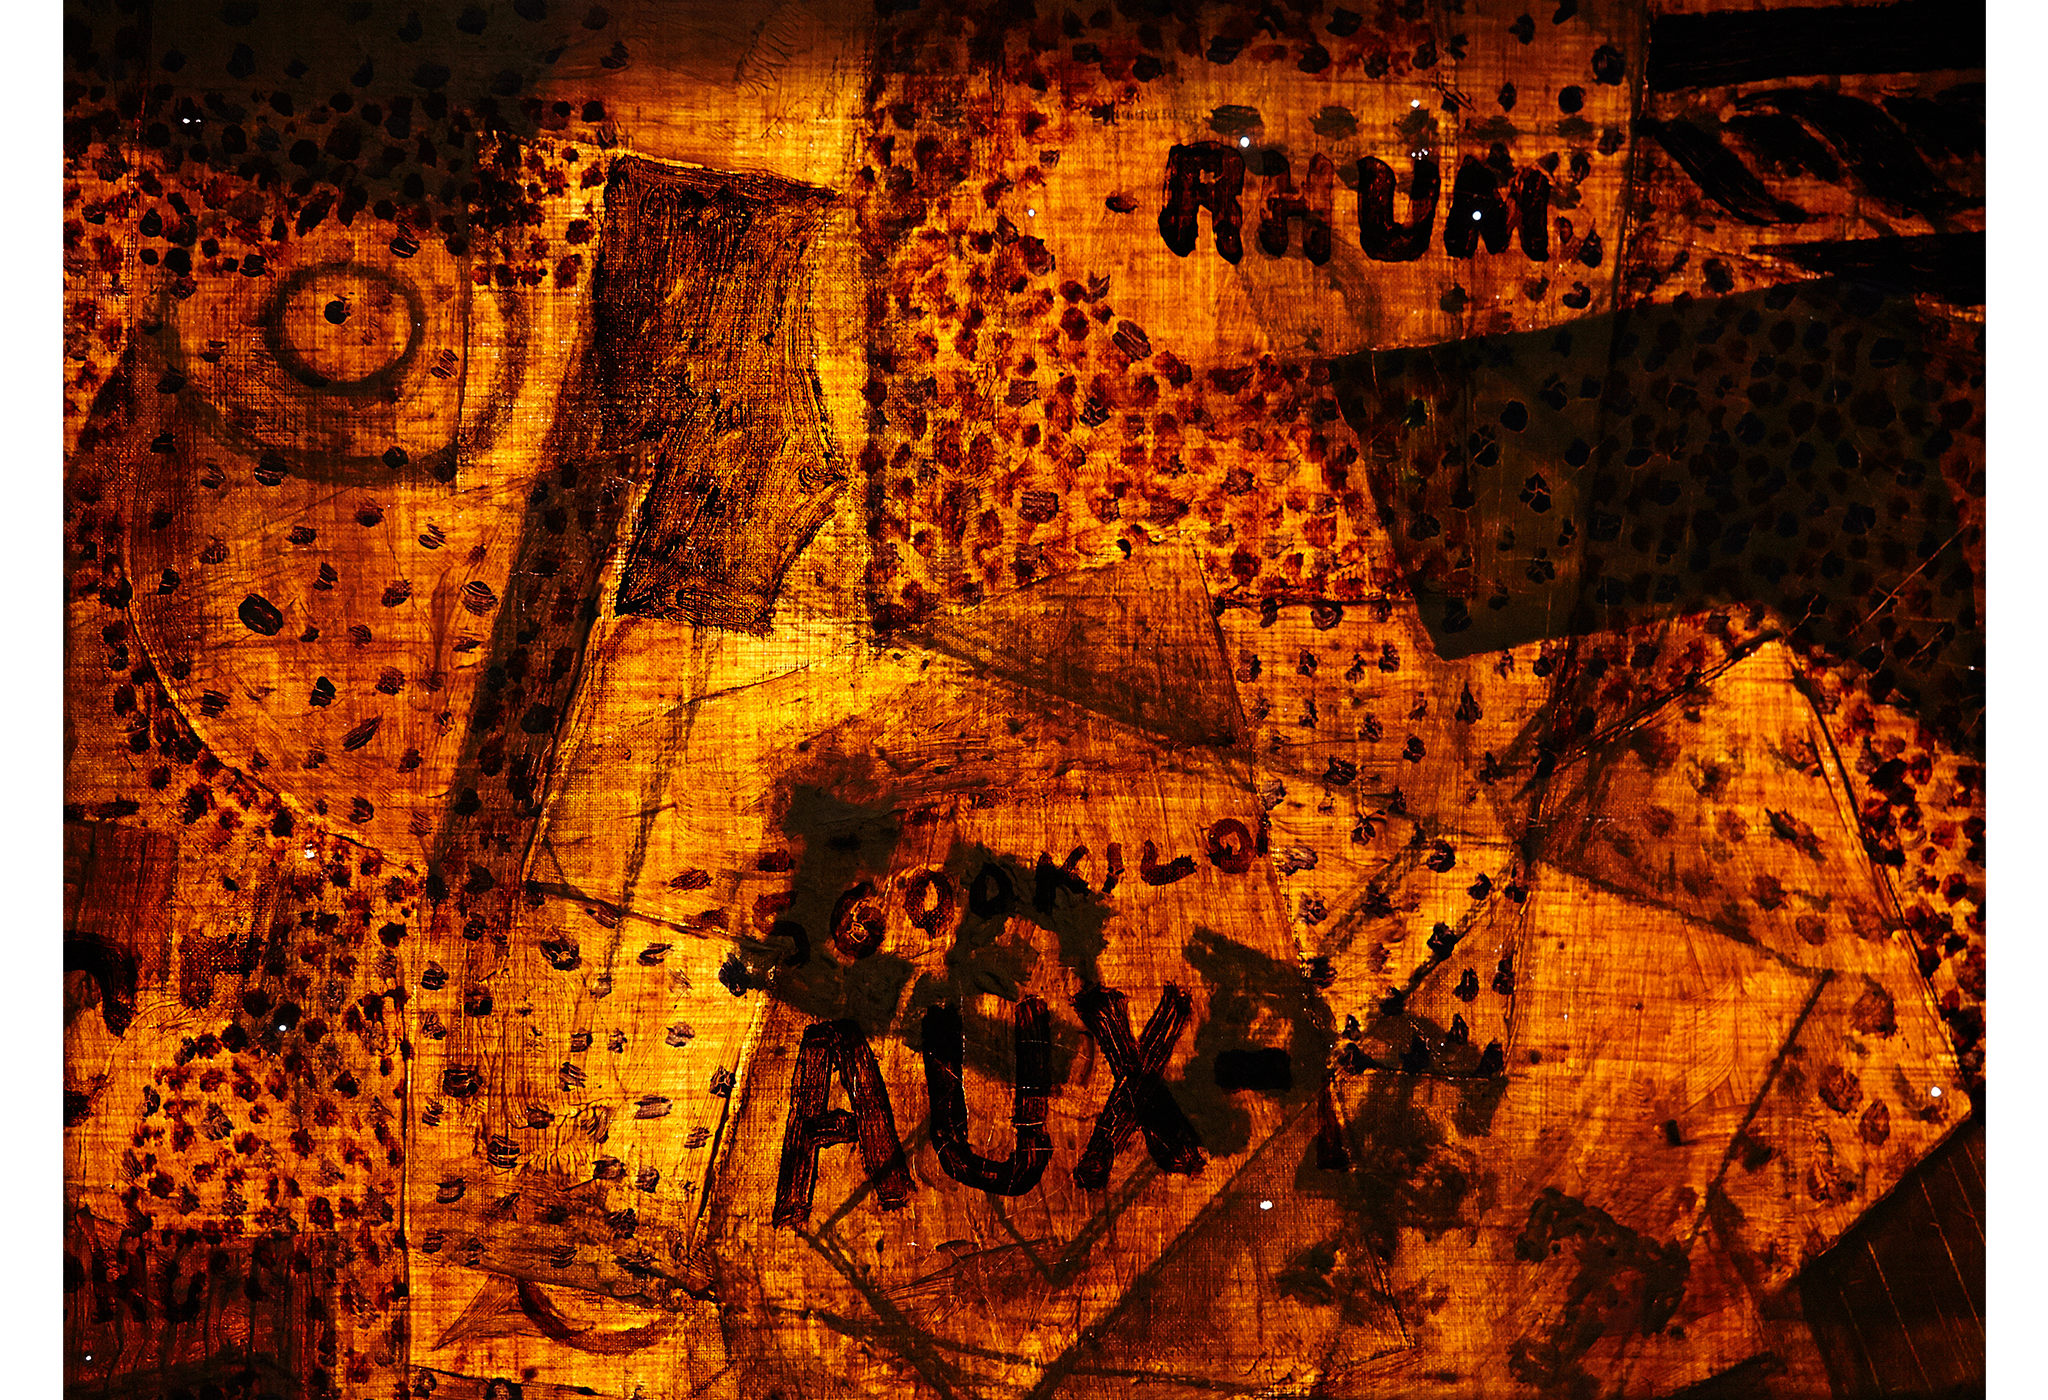 “Bottle of Rum” seen in orange and black tones through infrared light showing pinholes in the painting and the letters “Le Pe”